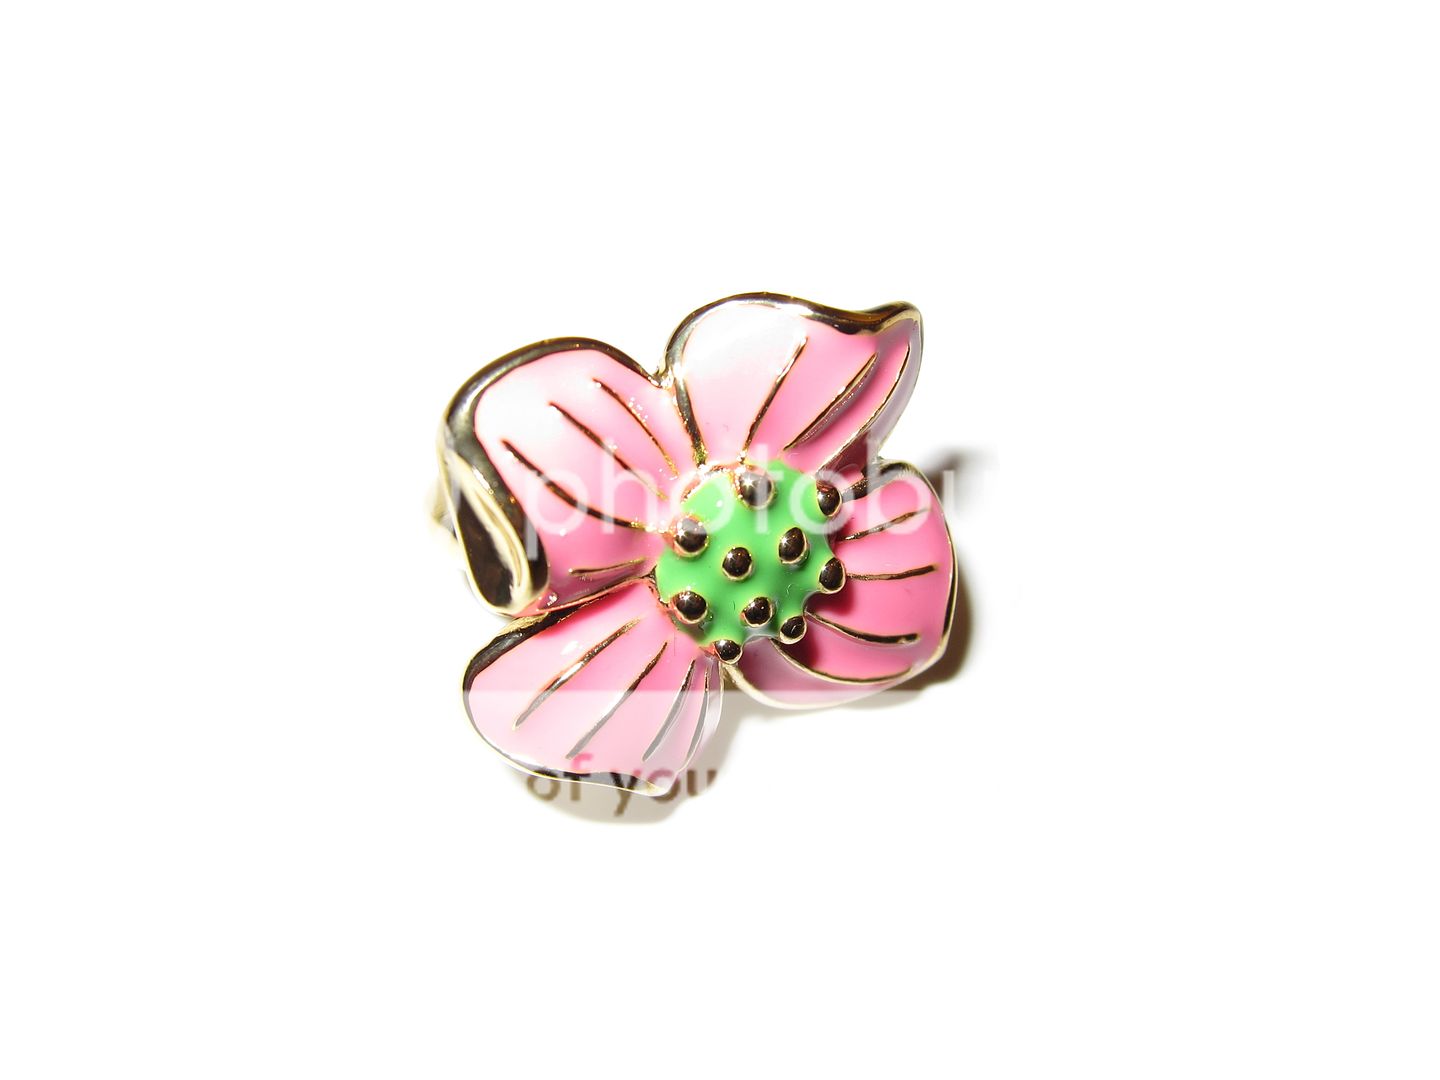 Lilly Pulitzer Palm Beach Garden Pink Floral Flower Cocktail Ring